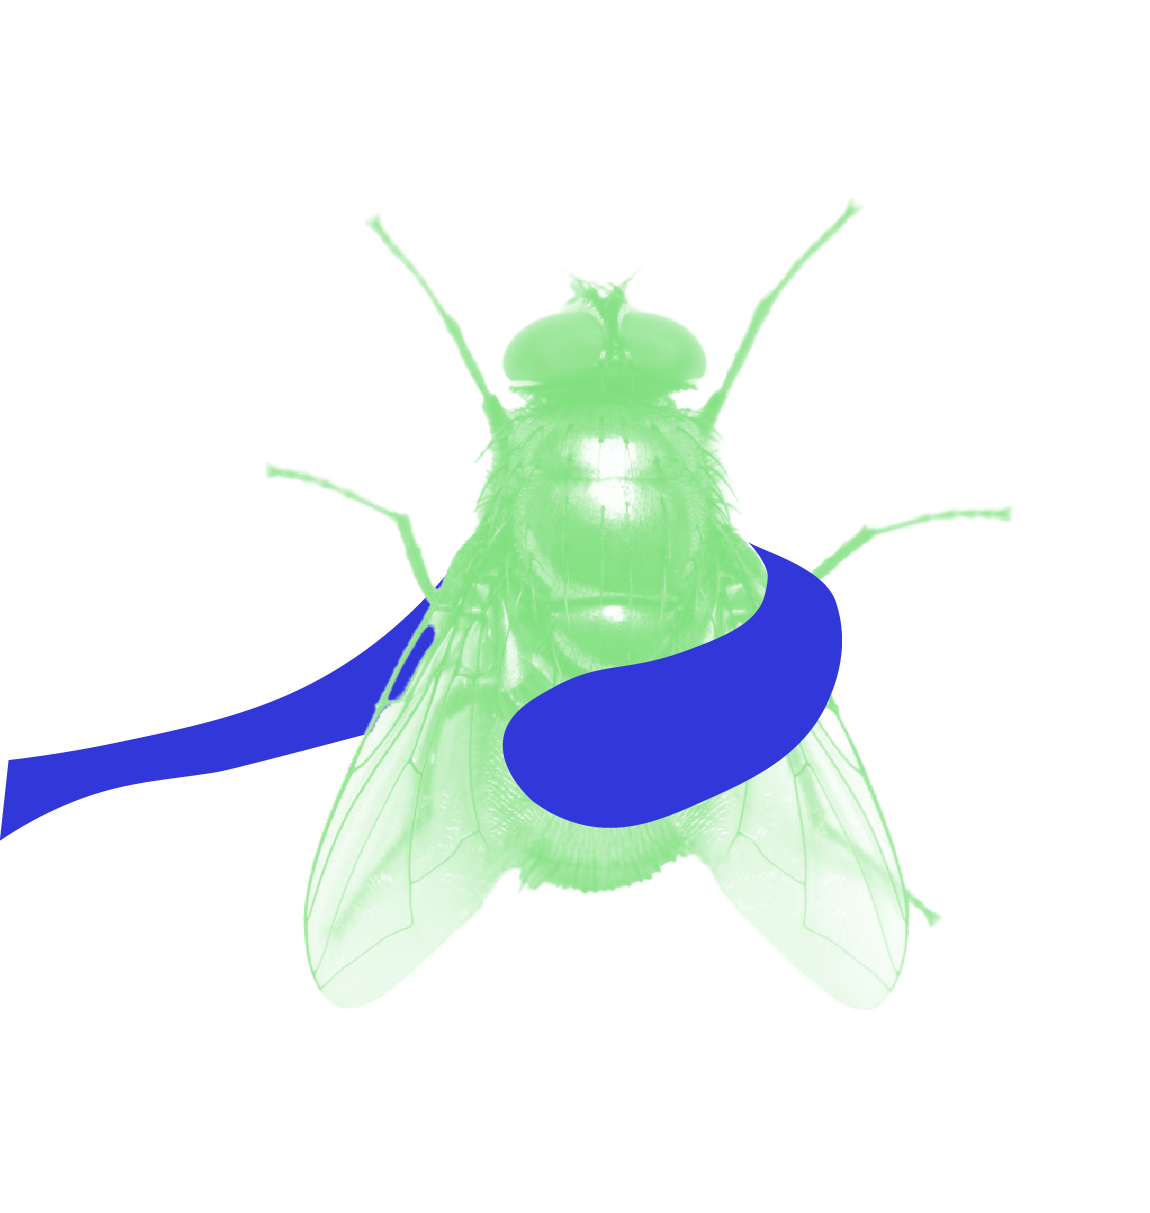 light green fly with blue tongue catch illustration